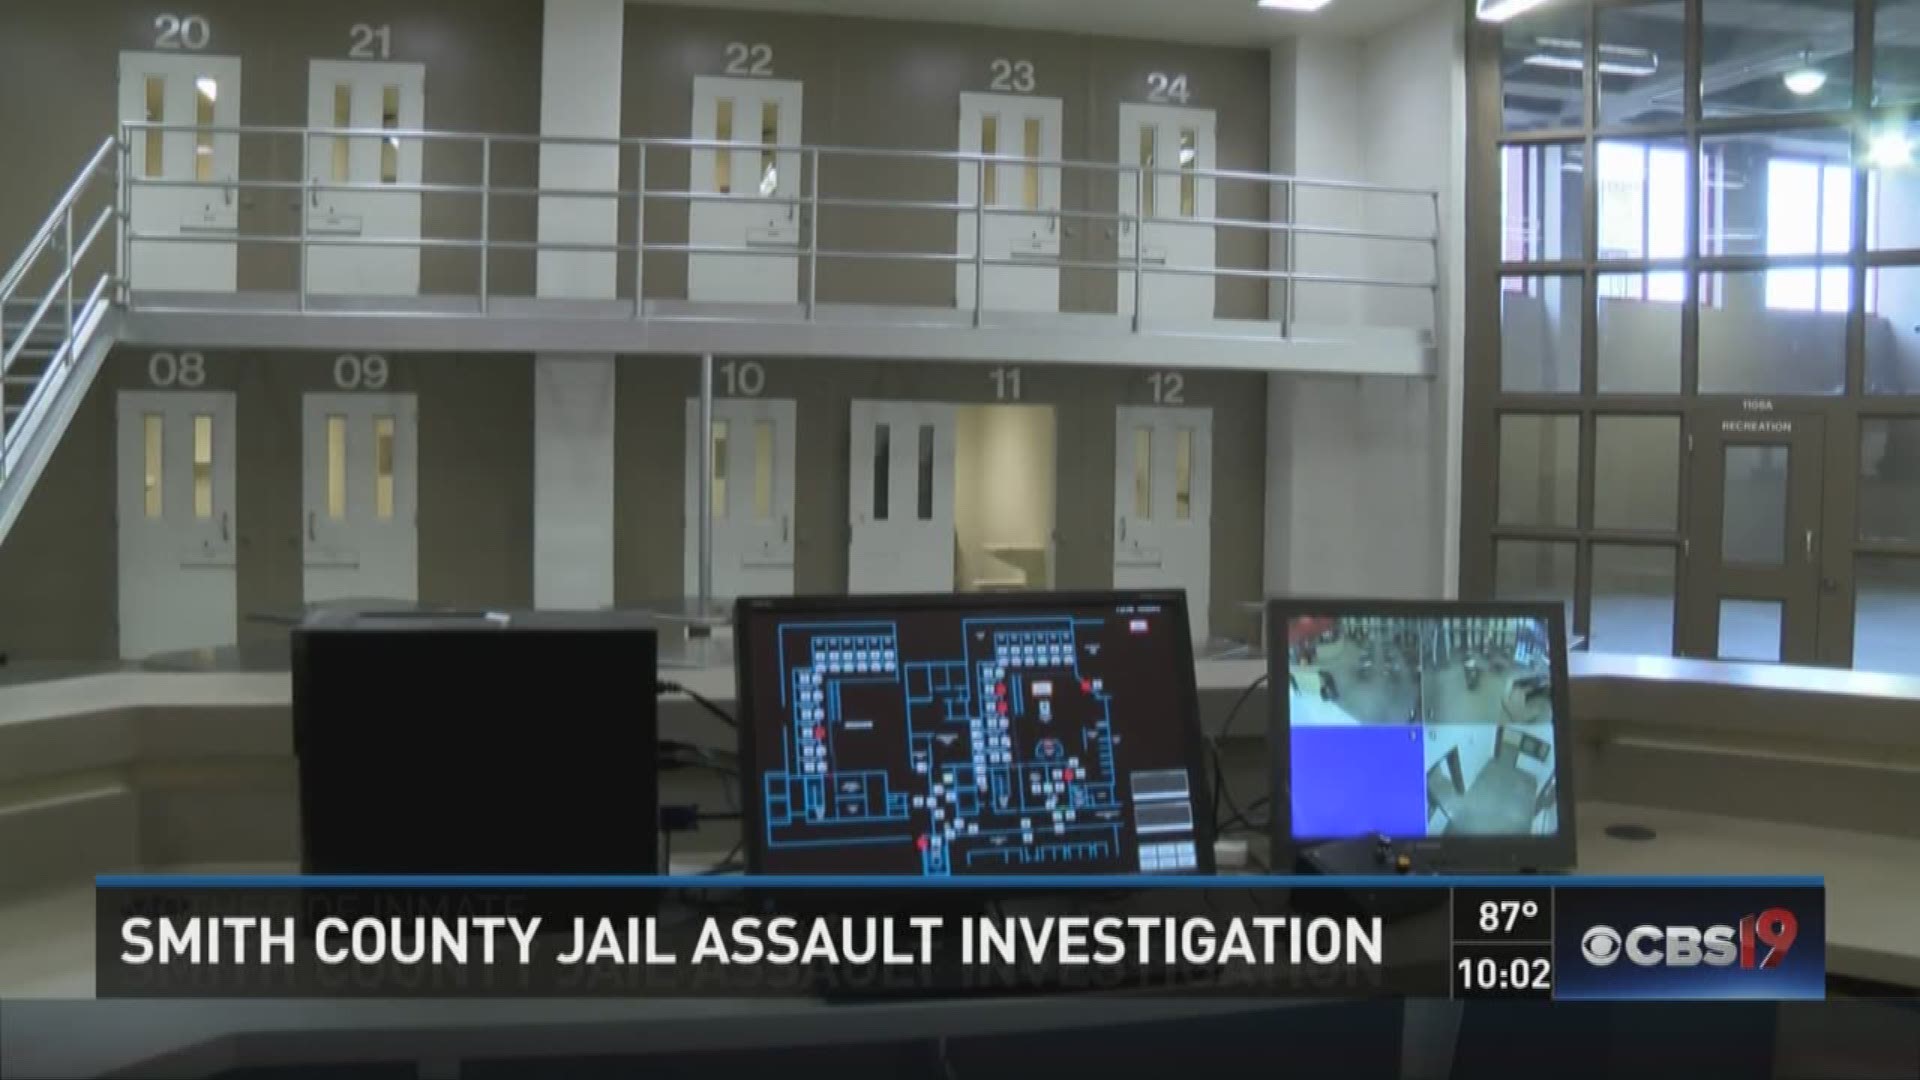 The Smith County Jail is under investigation after jail personnel allegedly sexually assaulted an inmate.